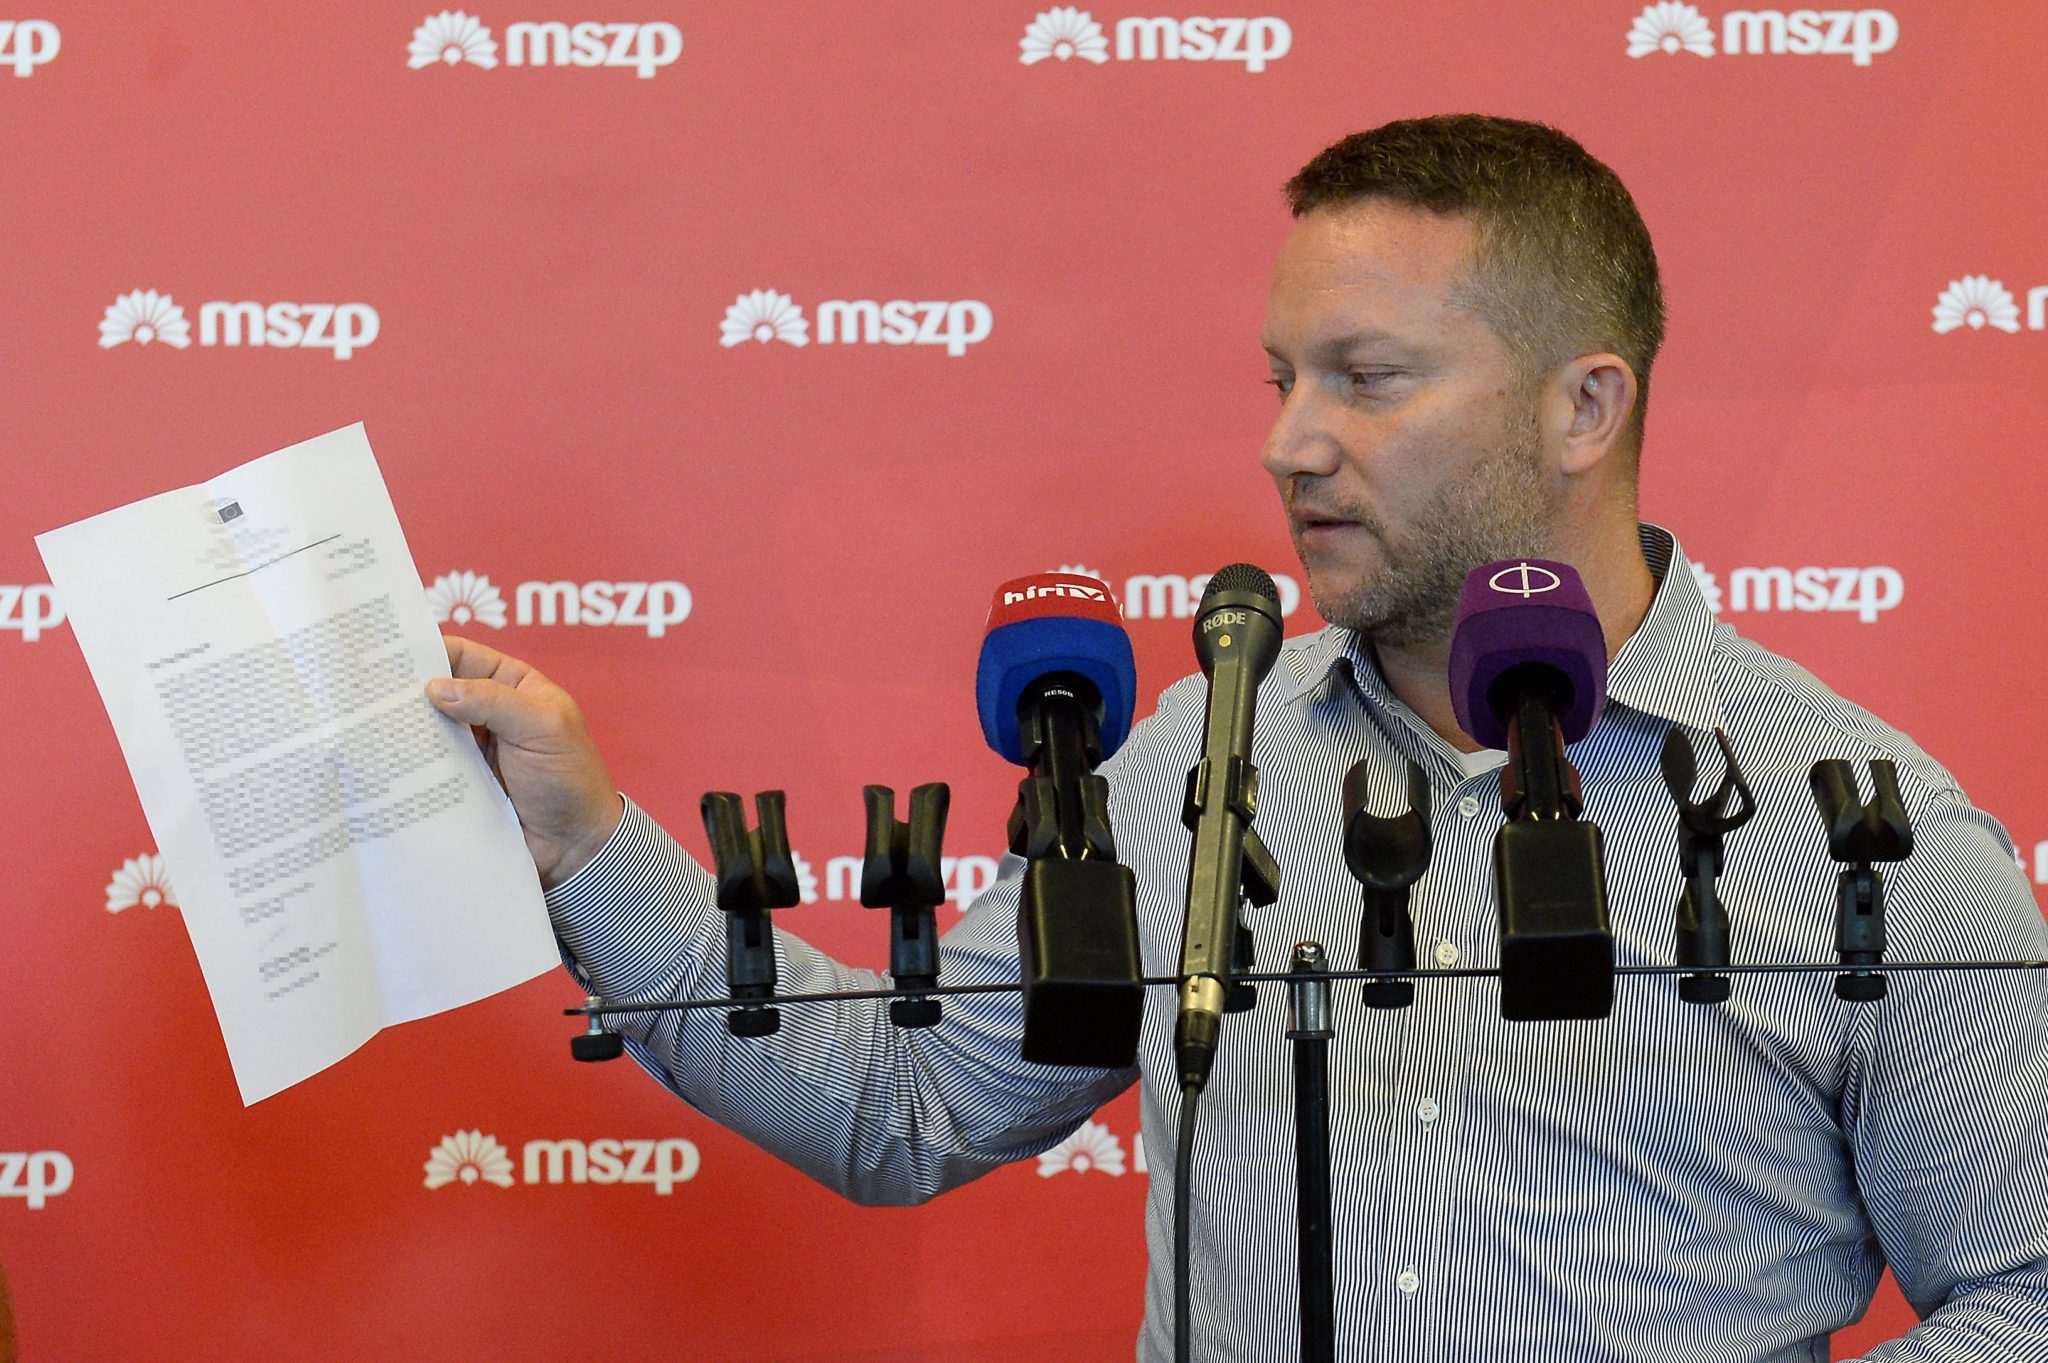 Socialist MEP: Data Protection Authority Finds Ministry Unlawfully Withheld Information on Hungary's Vaccine Procurement